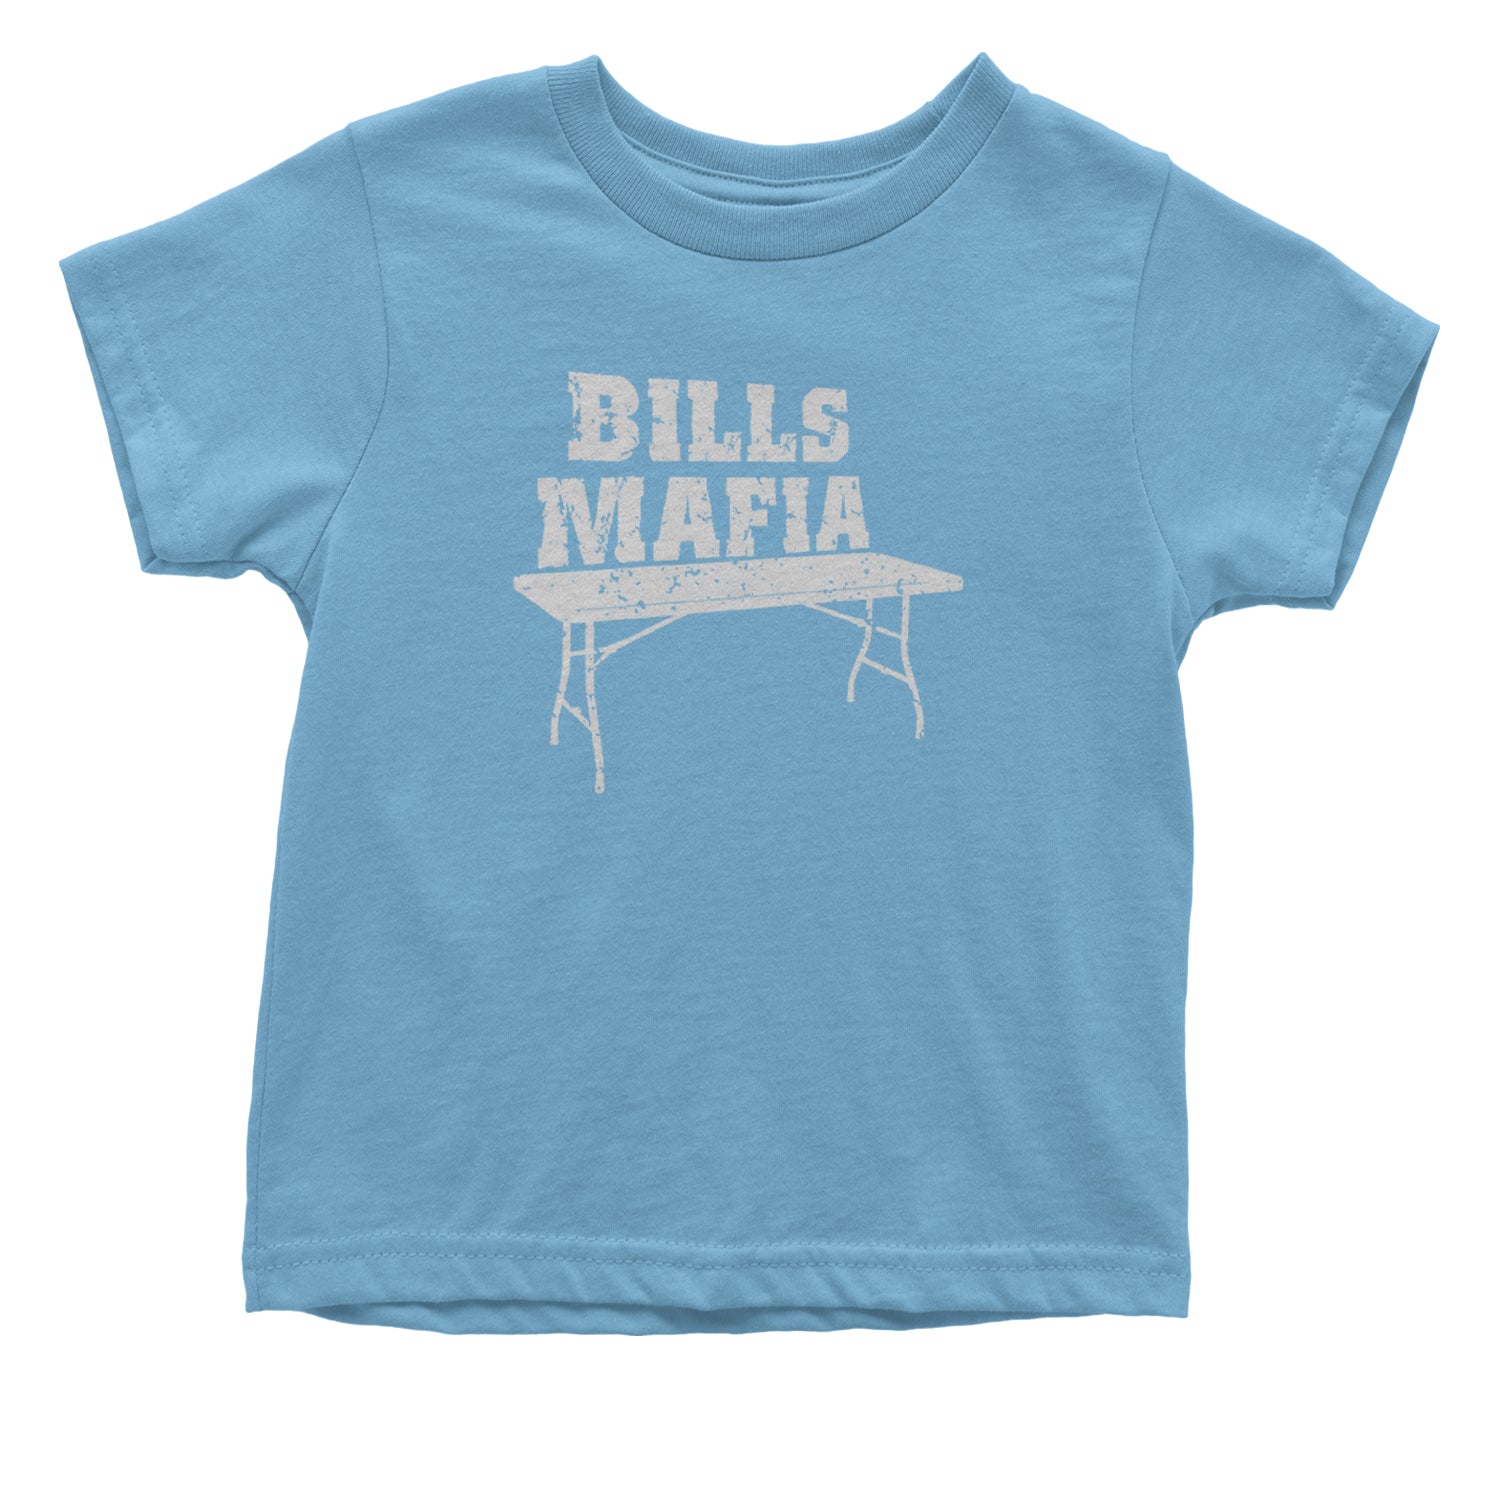 Bills Mafia Football Fan Infant One-Piece Romper Bodysuit and Toddler T-shirt #expressiontees by Expression Tees